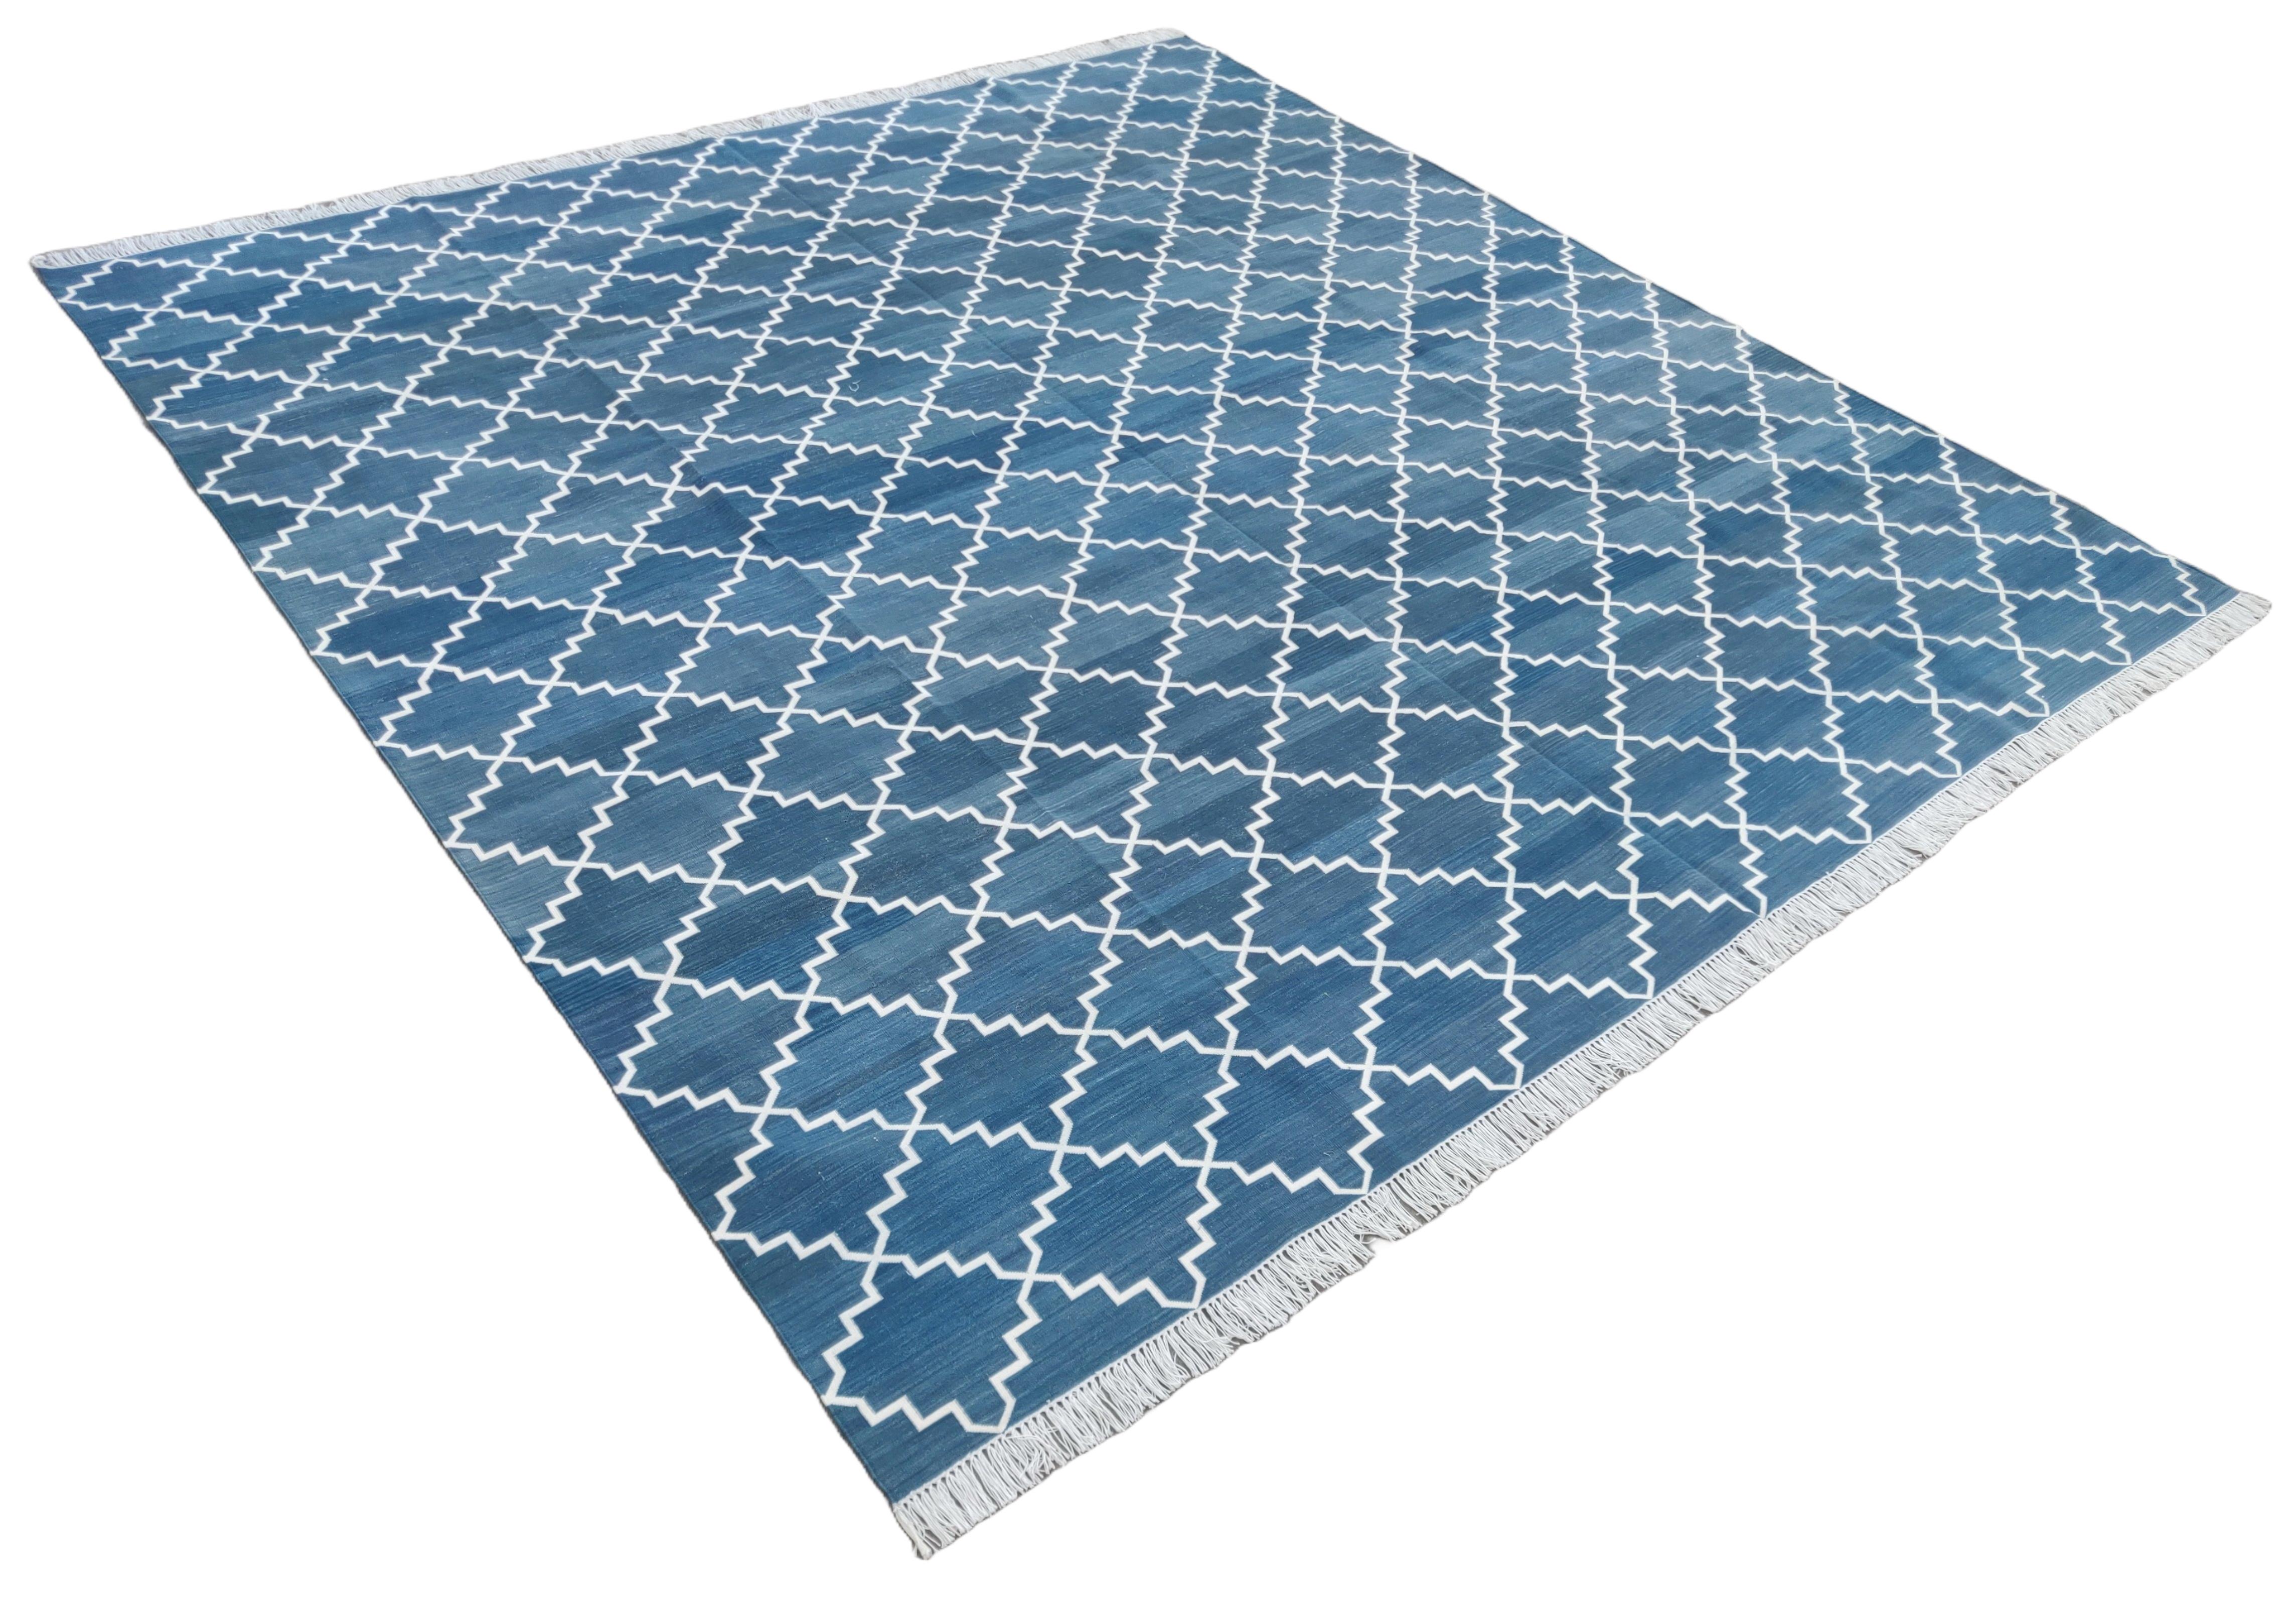 Cotton Vegetable Dyed Reversible Blue And White Geometric Universal Pattern Indian Rug - 8'x10'
These special flat-weave dhurries are hand-woven with 15 ply 100% cotton yarn. Due to the special manufacturing techniques used to create our rugs, the